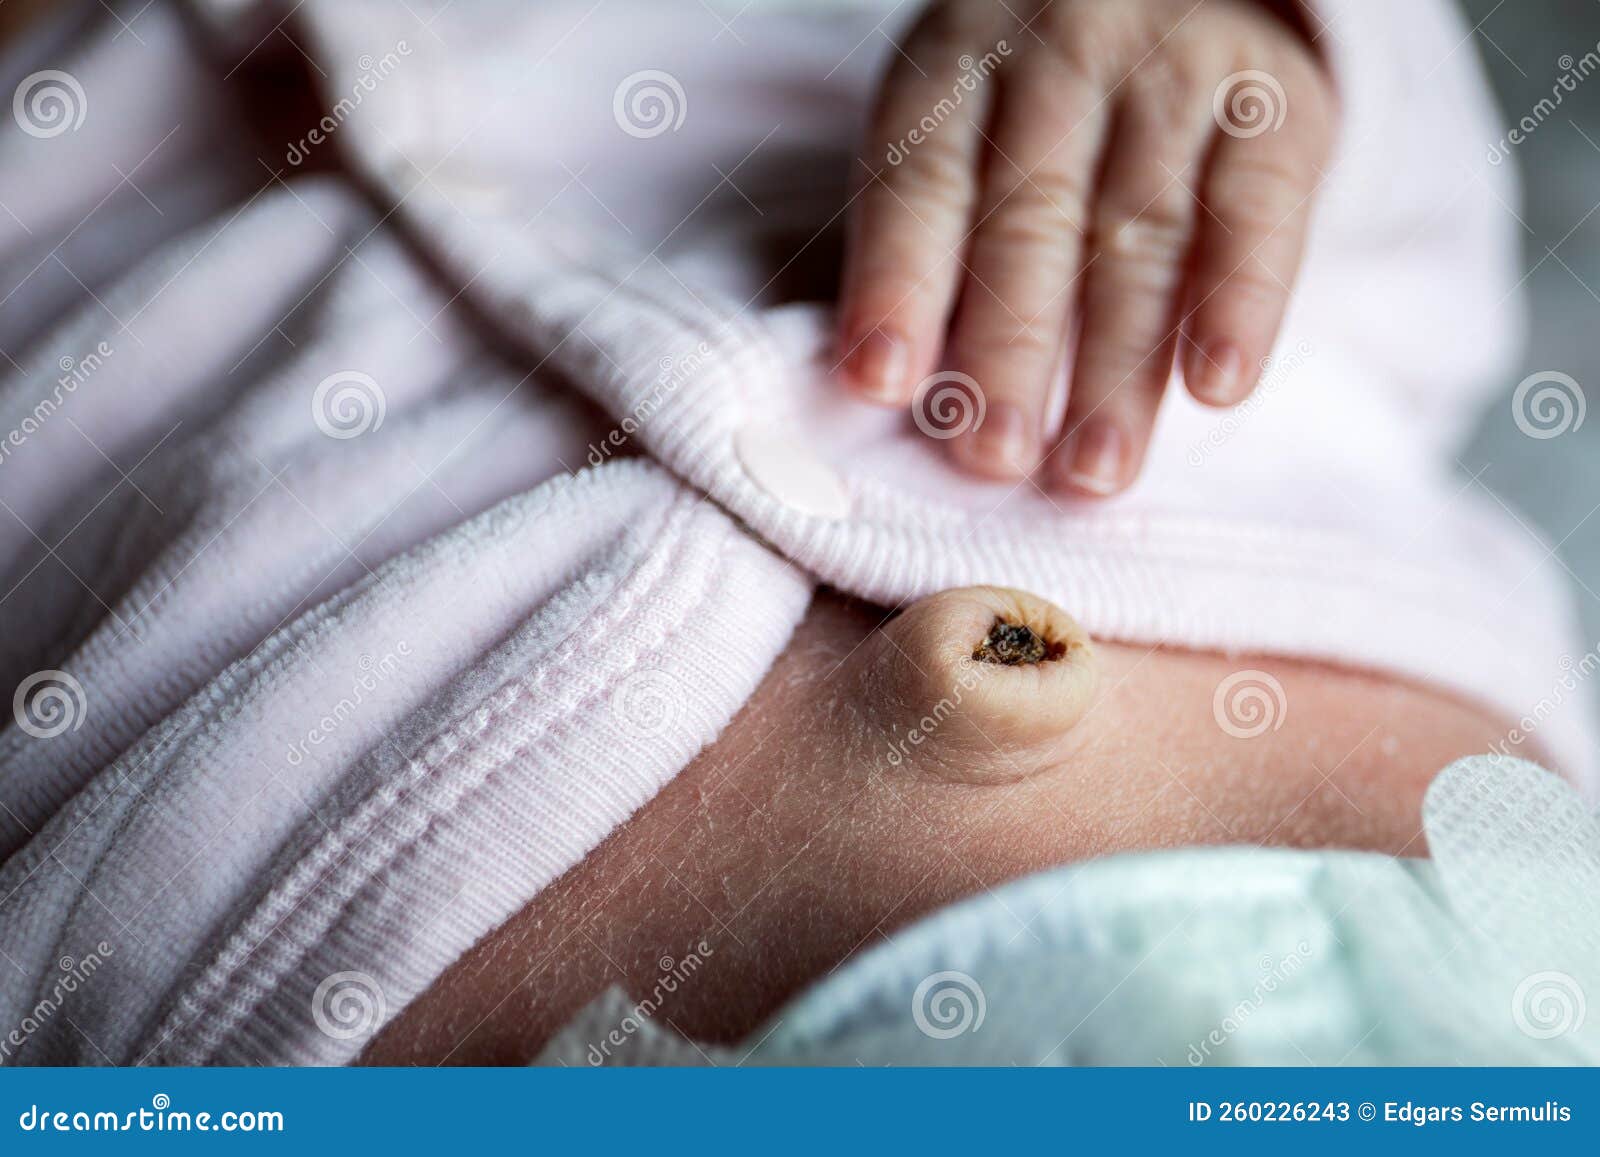 Newborn Hand and Navel with Umbilical Cord Just Fallen Off